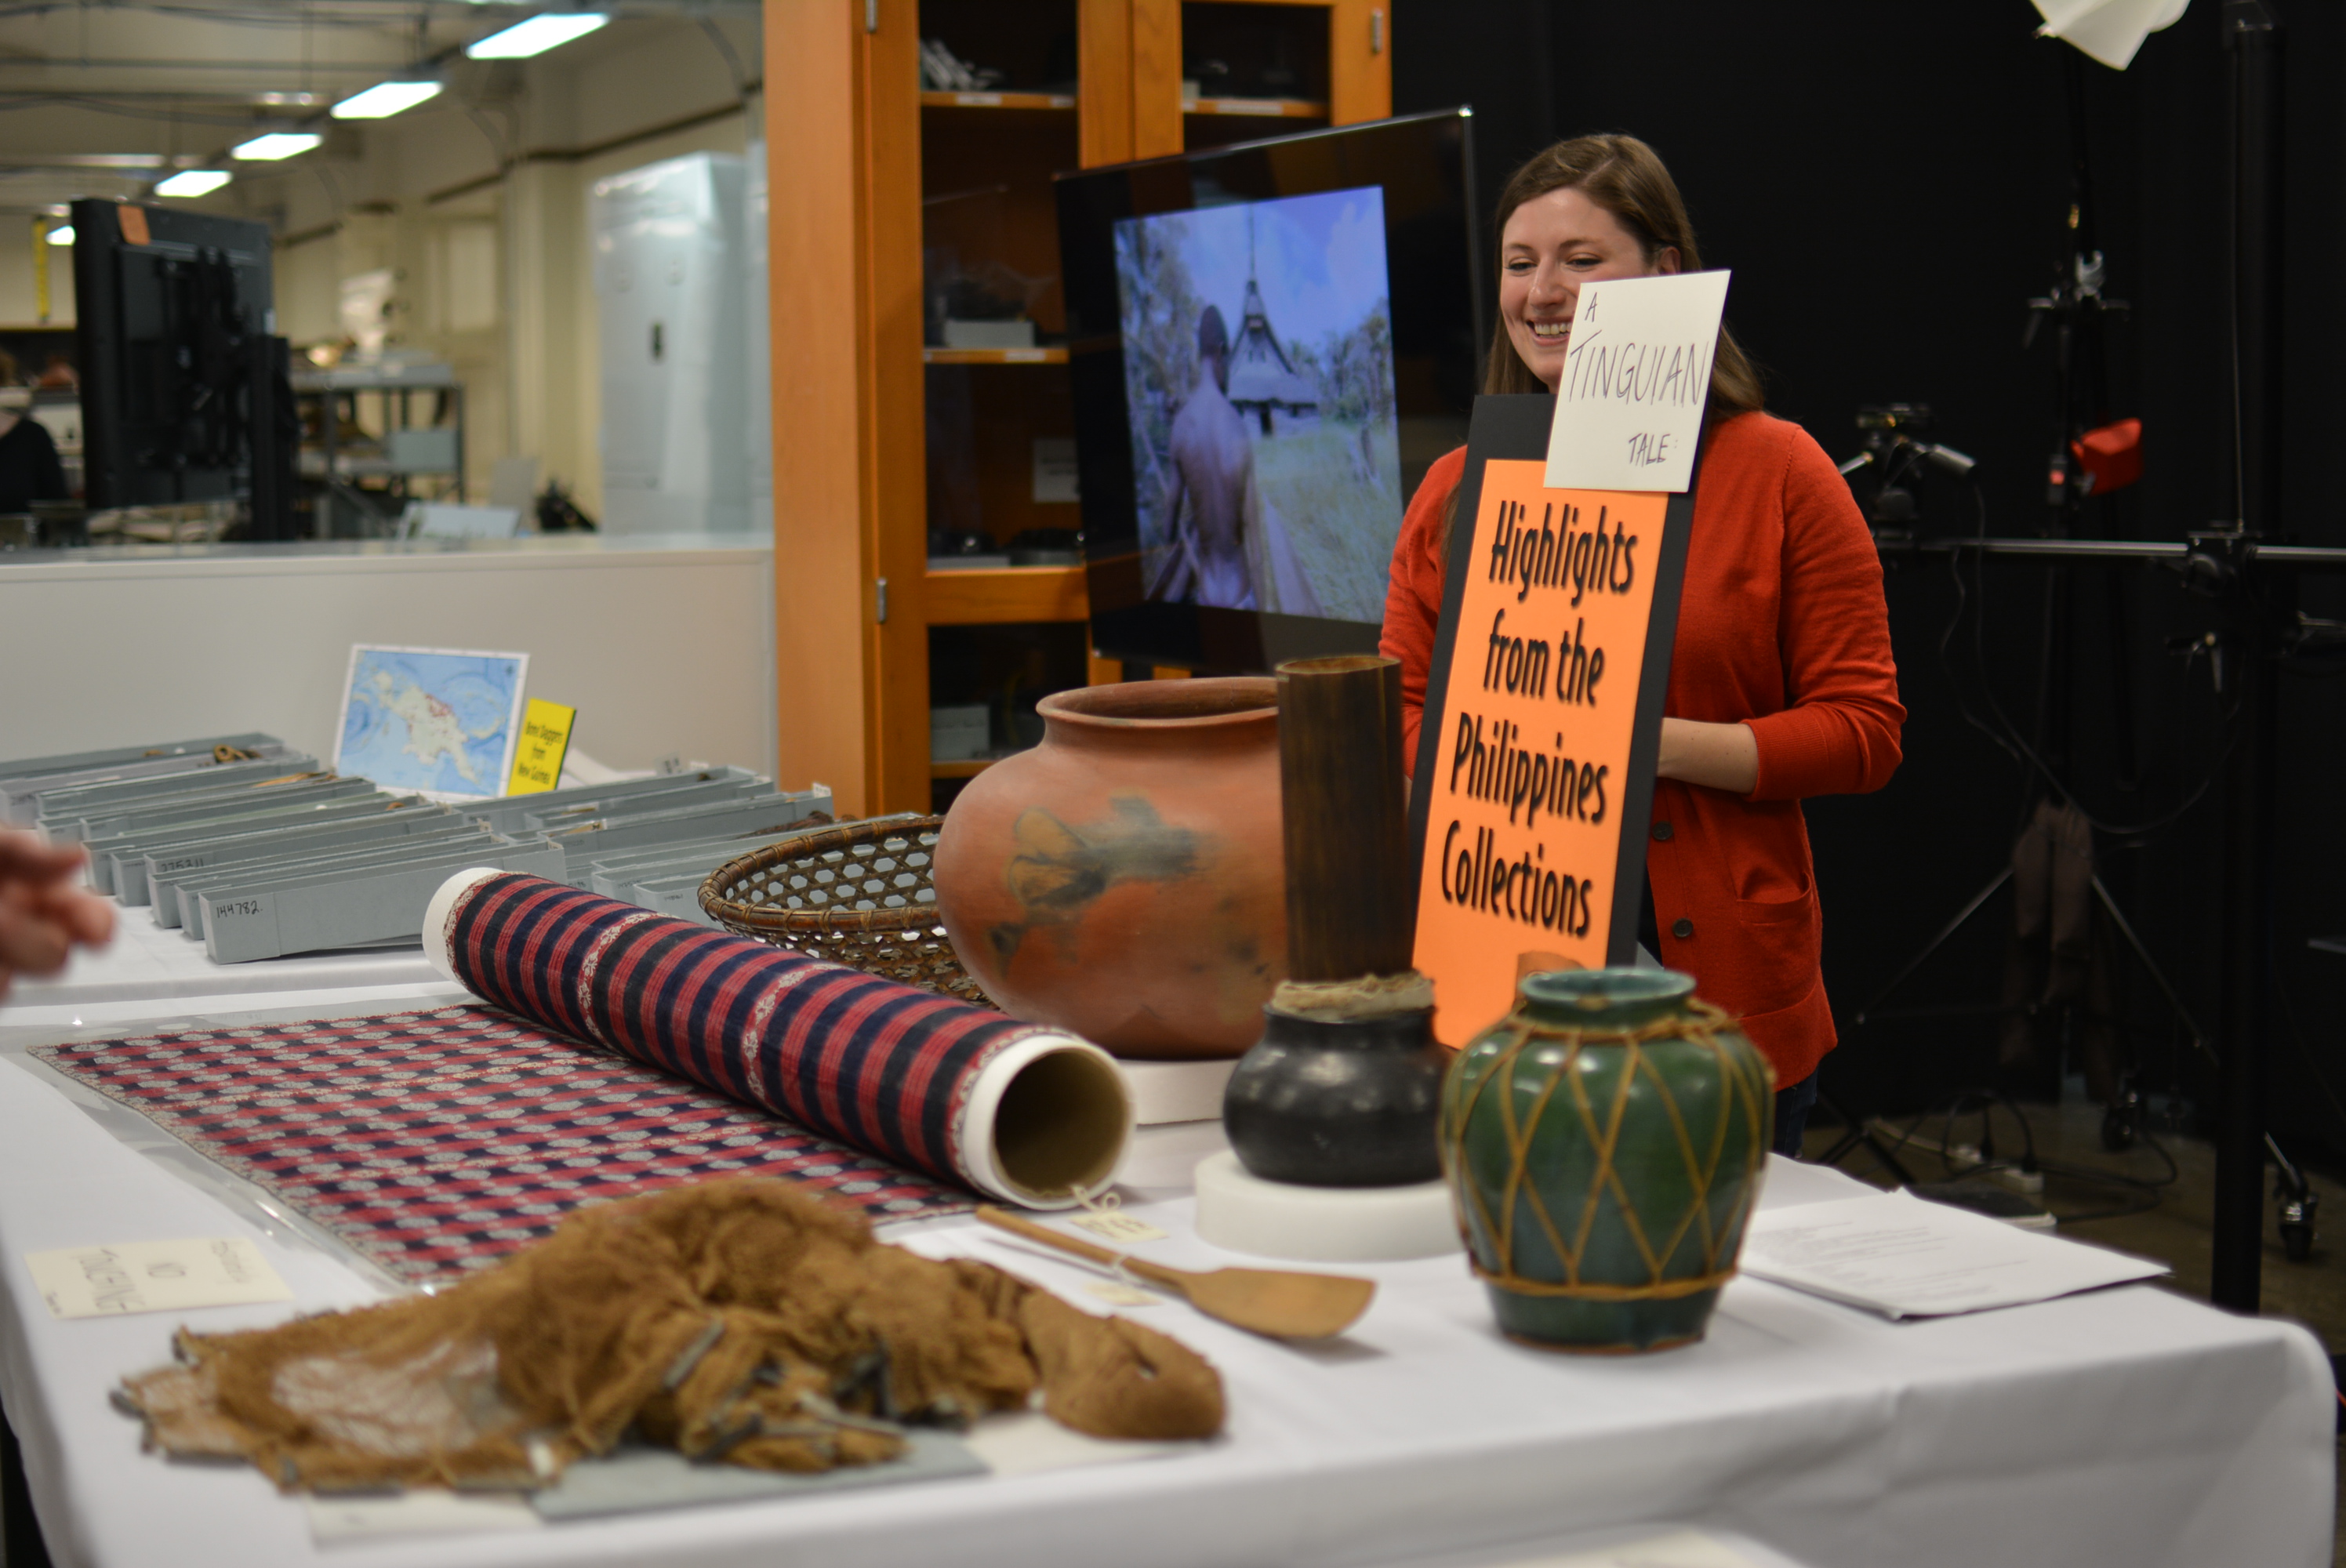 Jamie staffs the artifact display tables. (c) Field Museum of Natural History - CC BY-NC 4.0